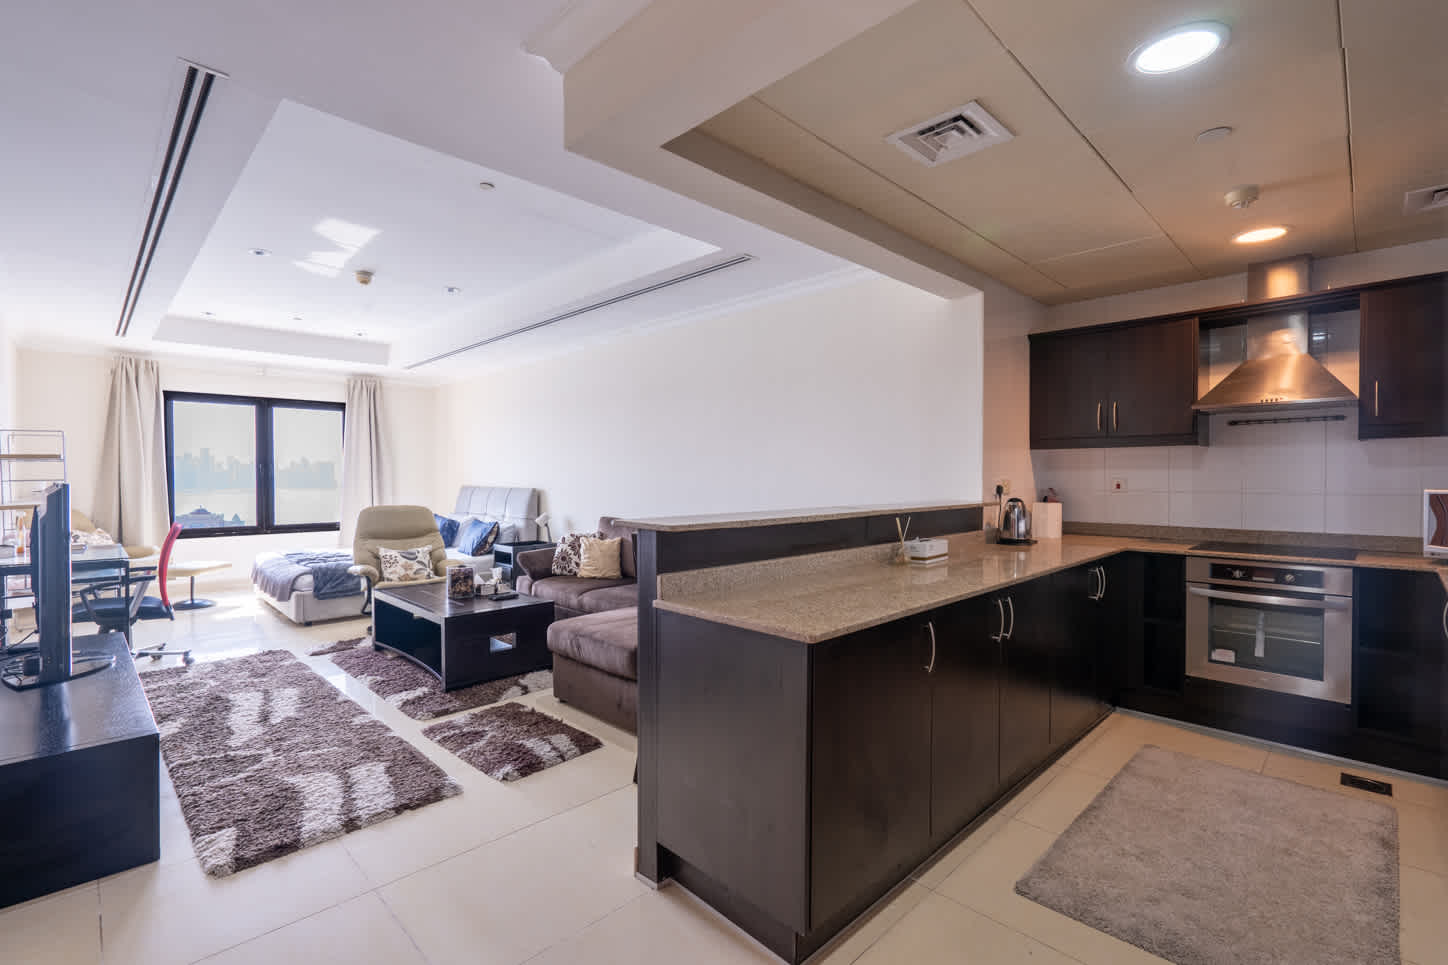 25 Spaces Real Estate - Porto Arabia - Properties for Rent - 16 March 2023 refWAPT258067 (3)